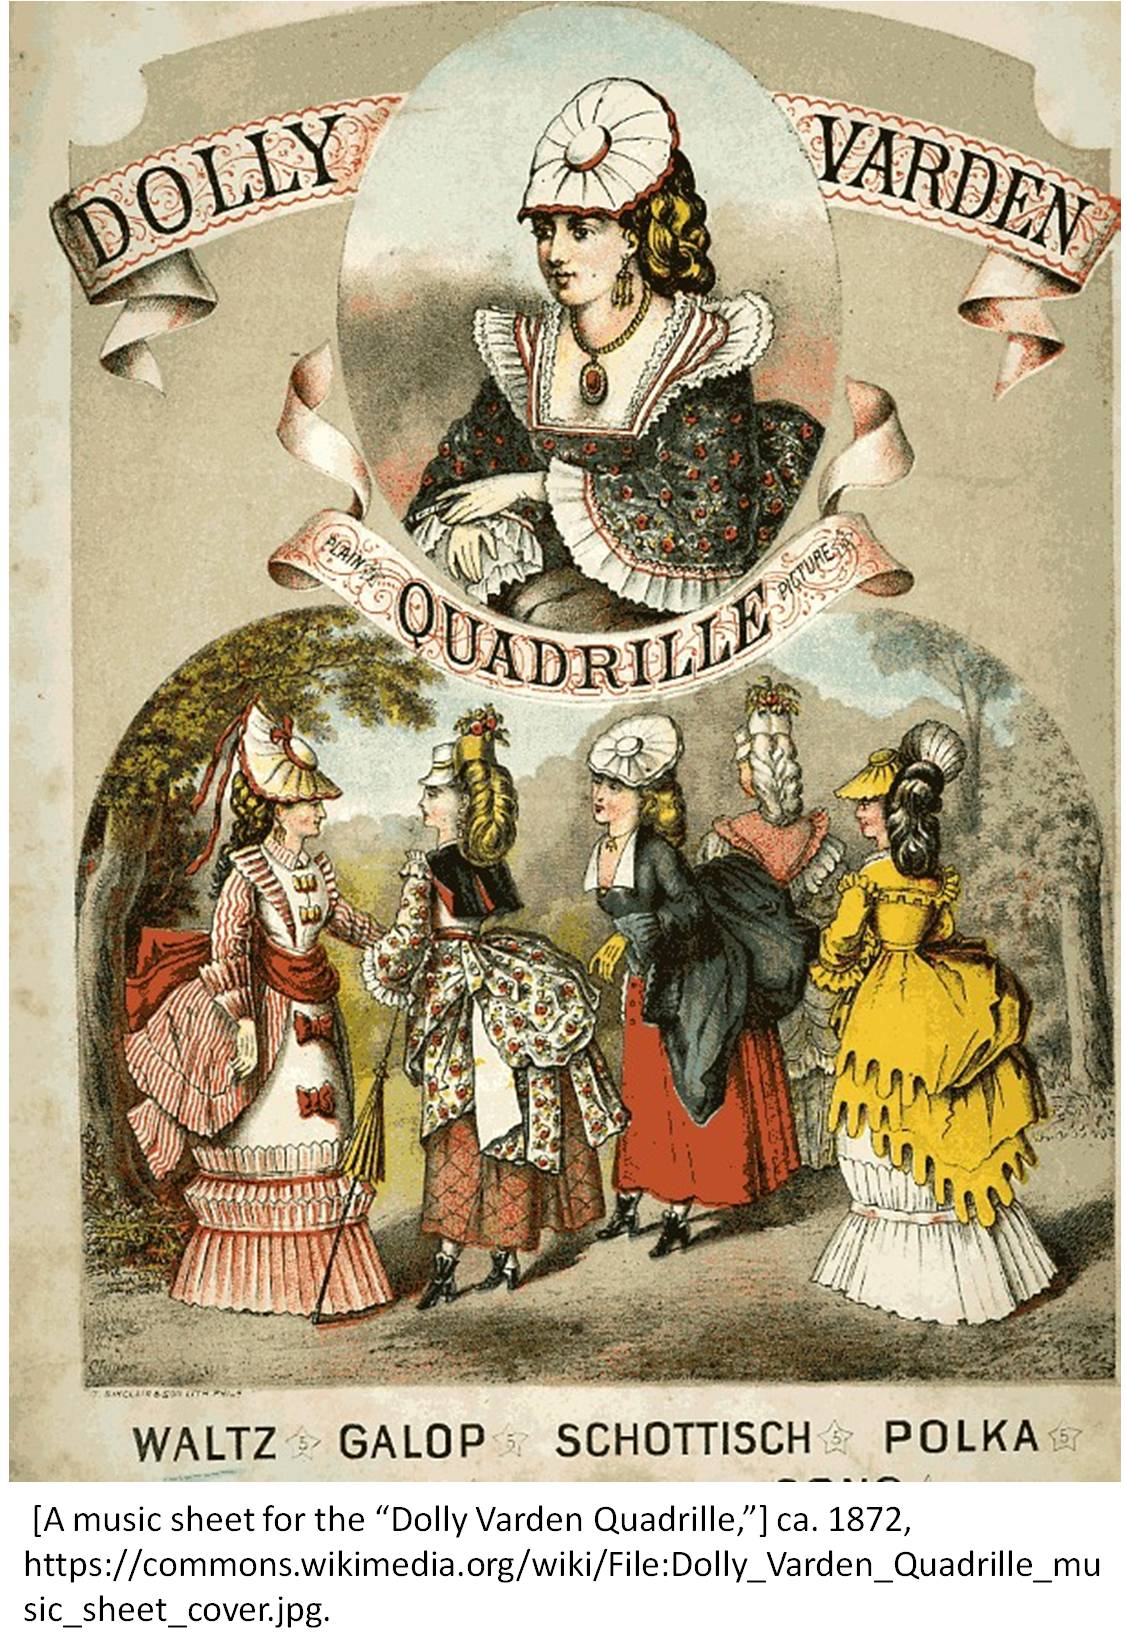 [A music sheet for the “Dolly Varden Quadrille,”] ca. 1872, https://commons.wikimedia.org/wiki/File:Dolly_Varden_Quadrille_music_sheet_cover.jpg.